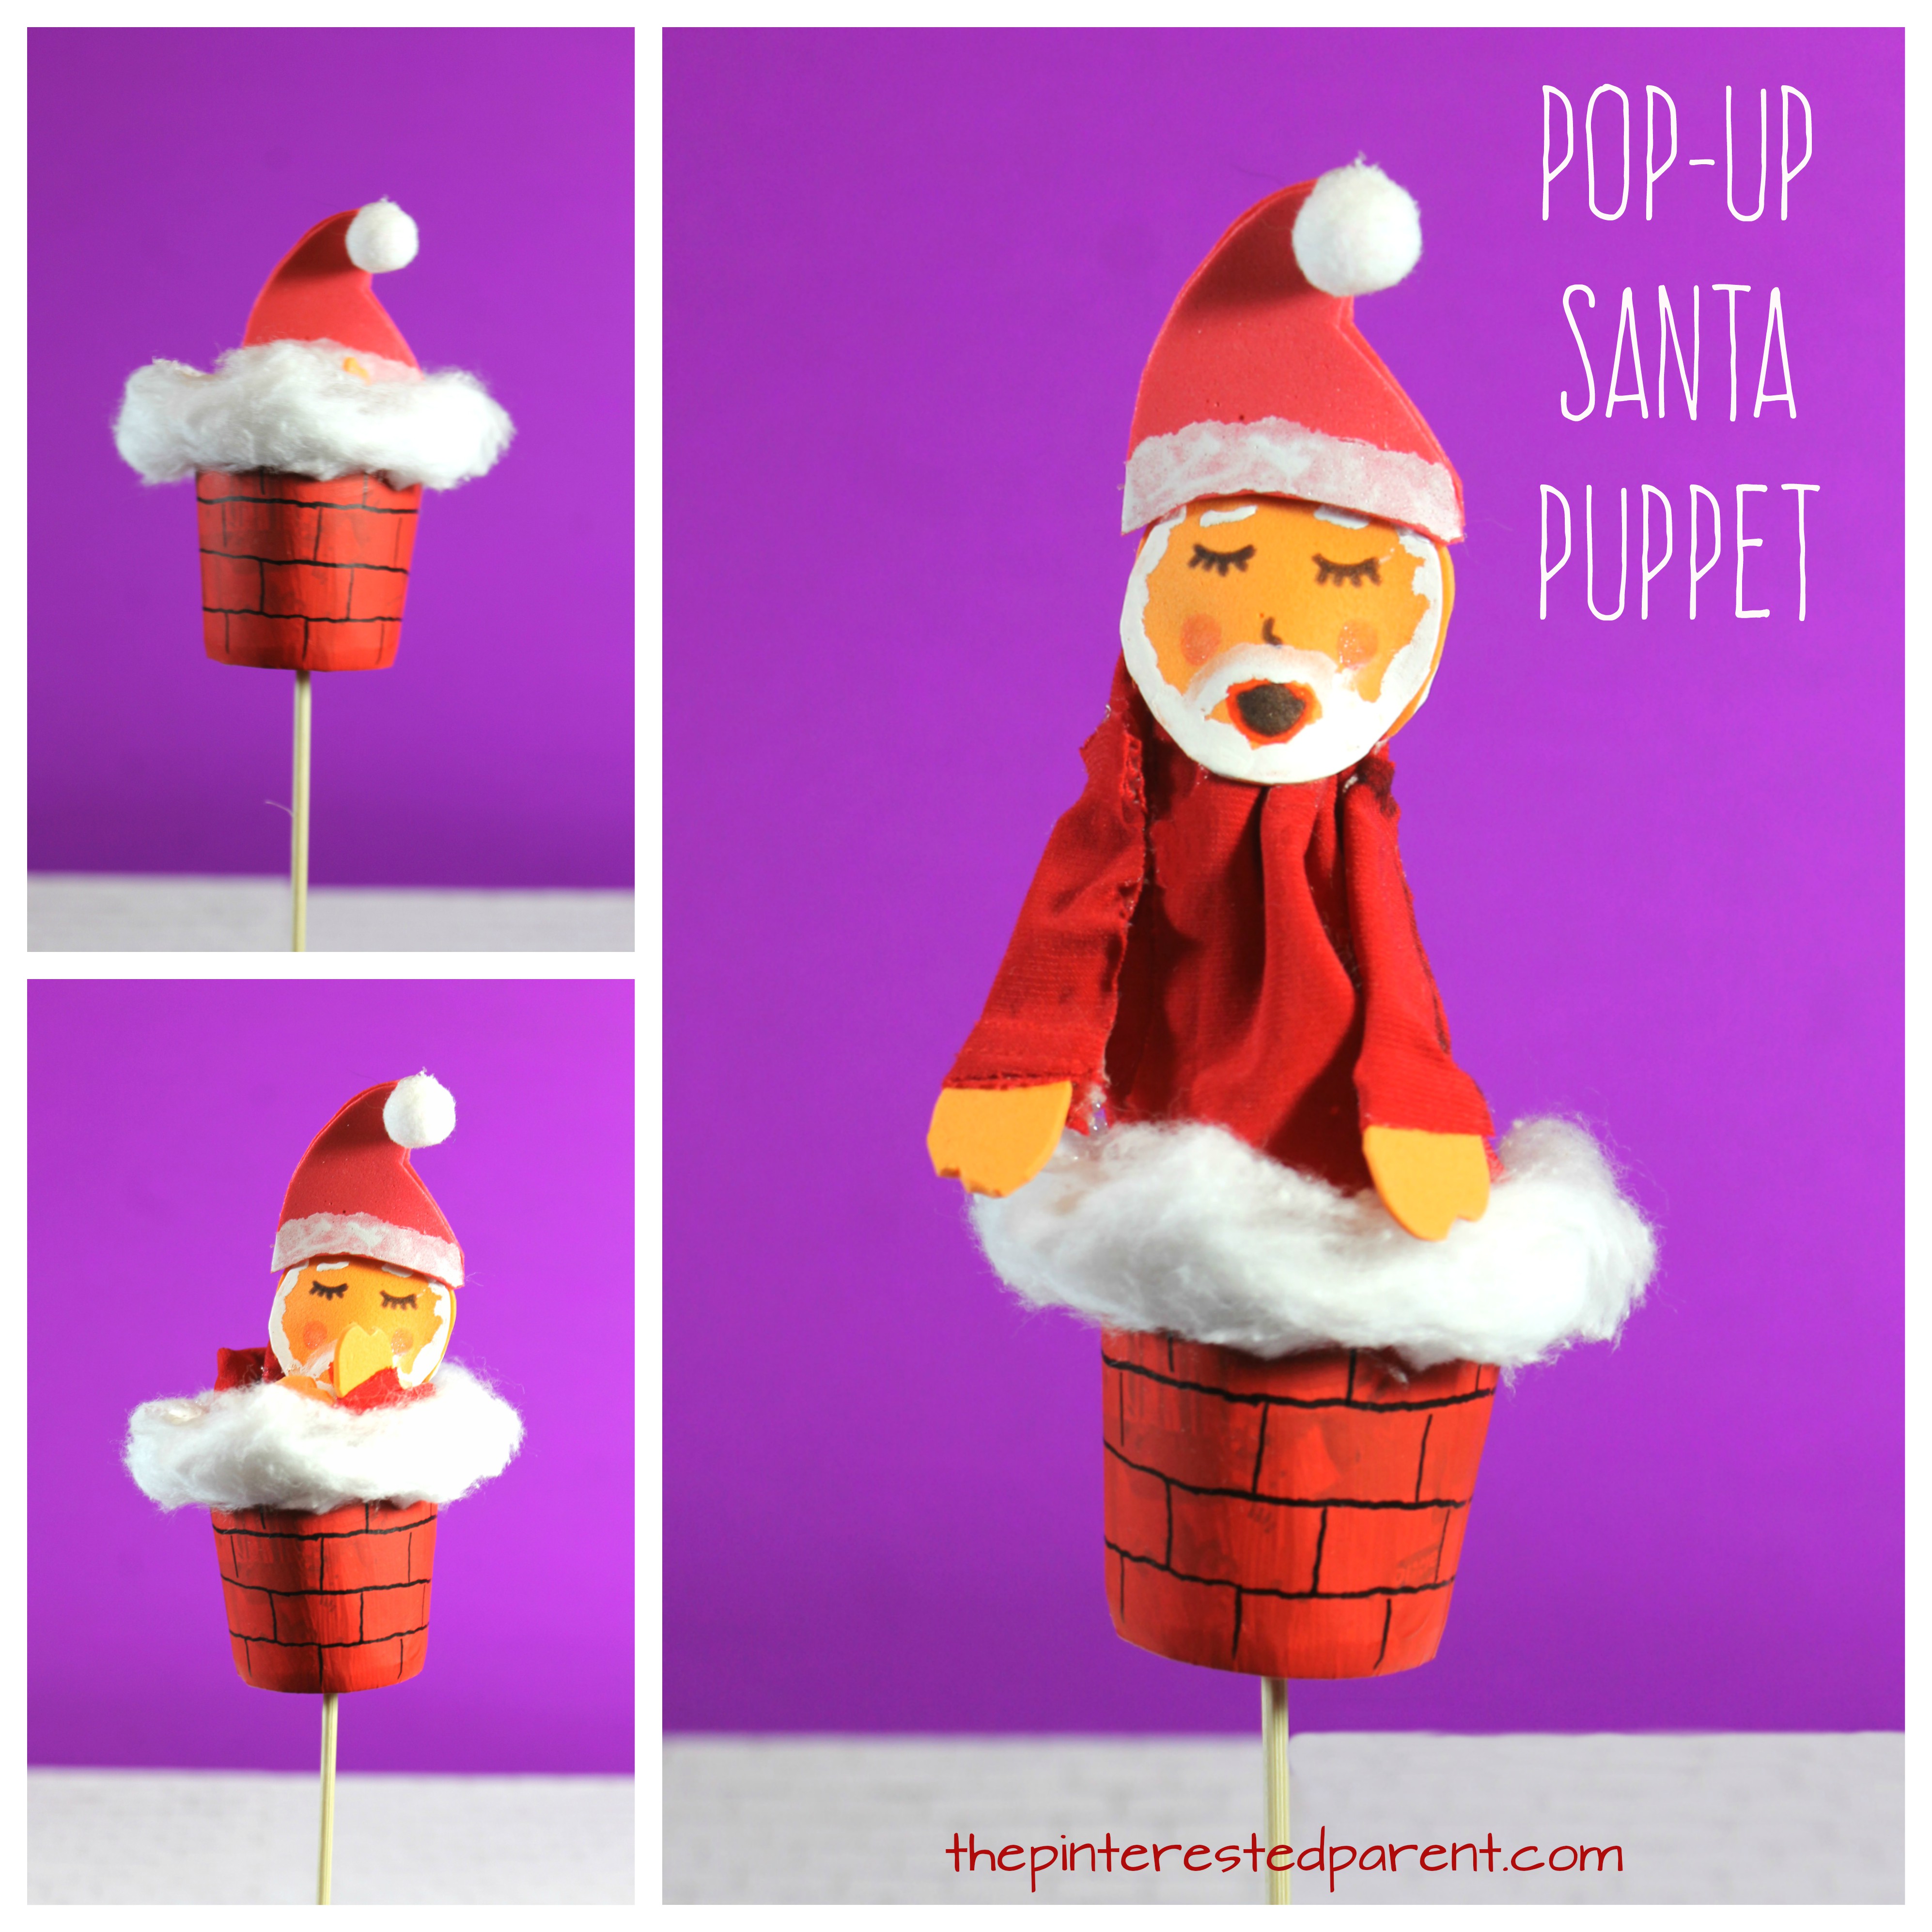 Pop-up Santa Puppet . Christmas arts and crafts for kids. Santa coming out of the chimney DIxie cup craft